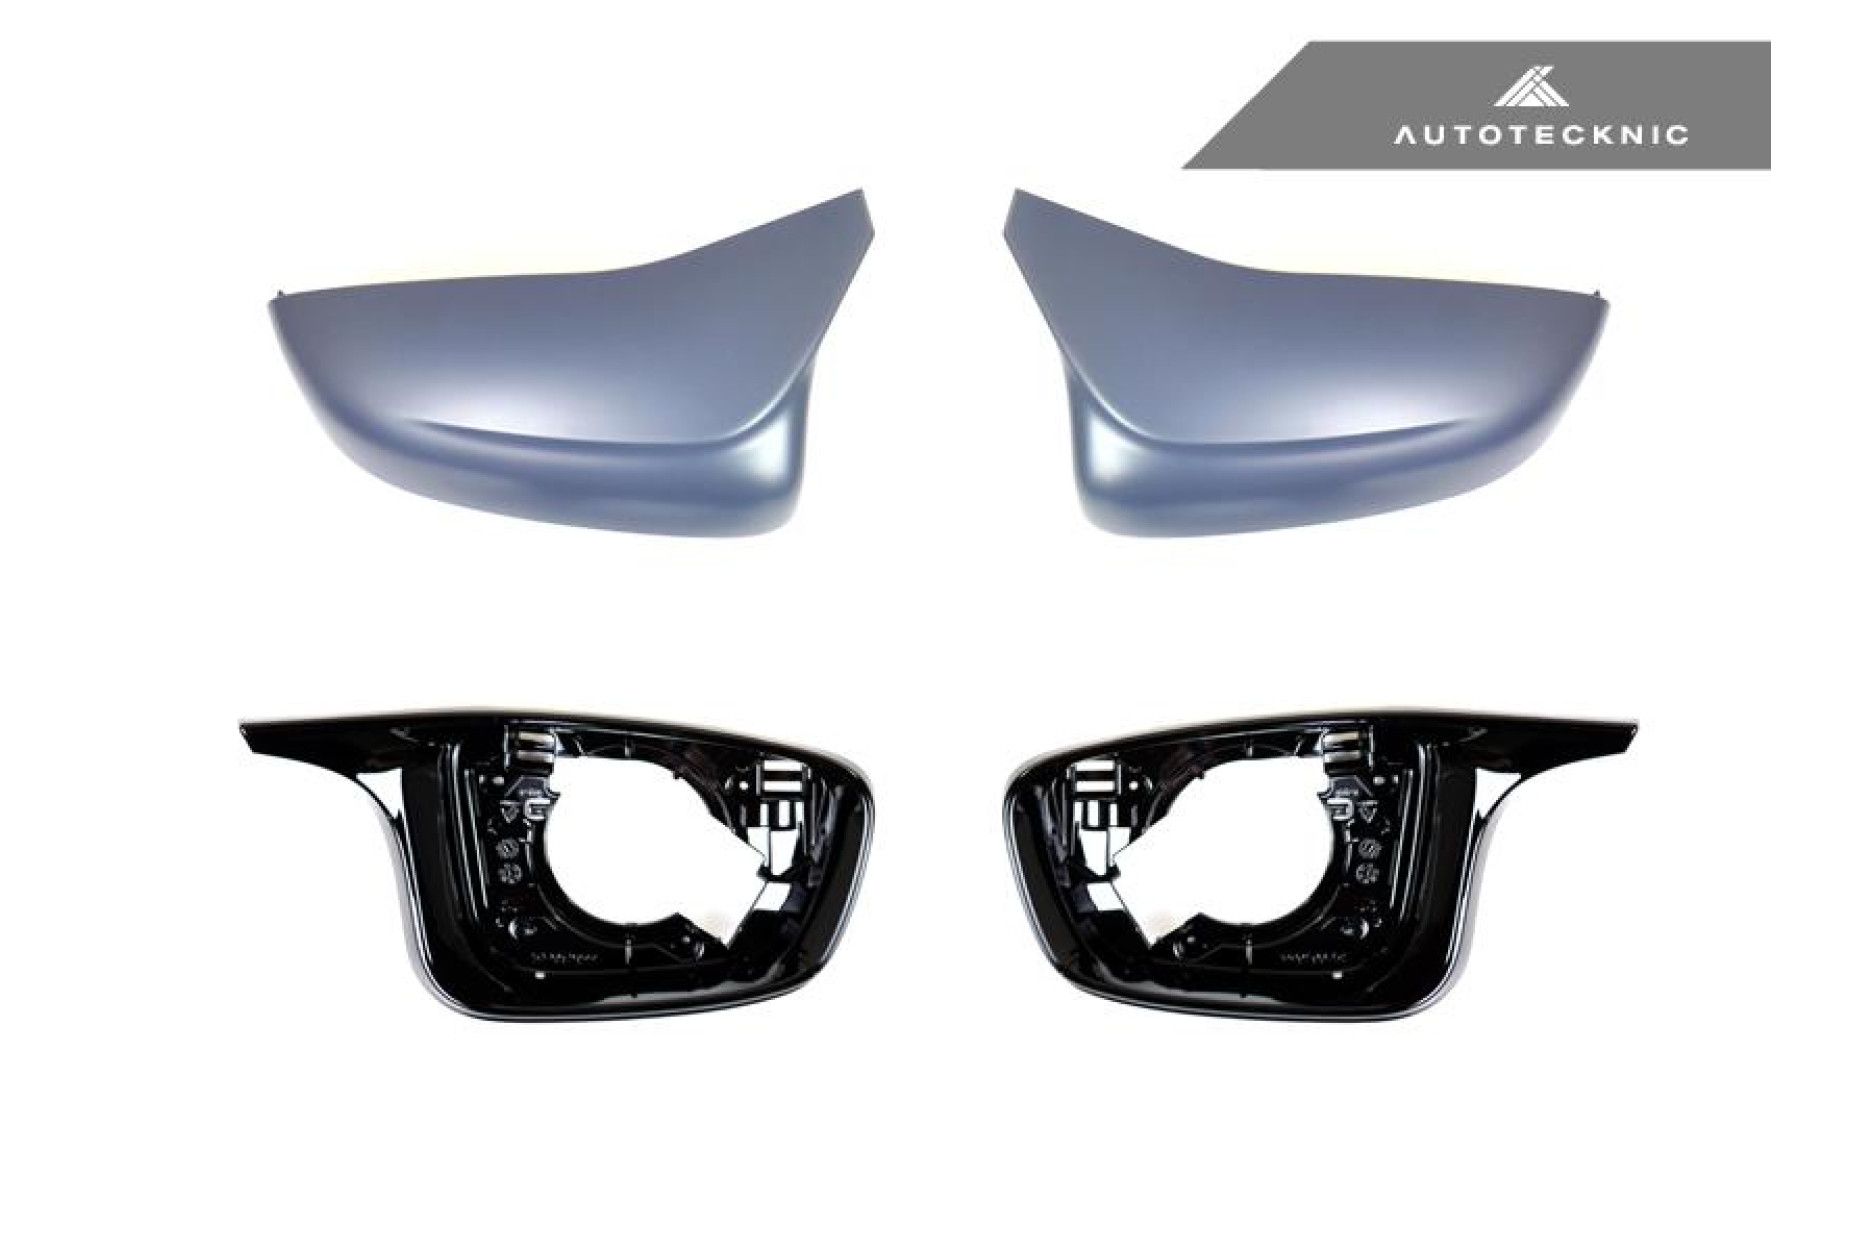 Autotecknic replacement mirror caps for BMW 5er|6er G30|G32 painted